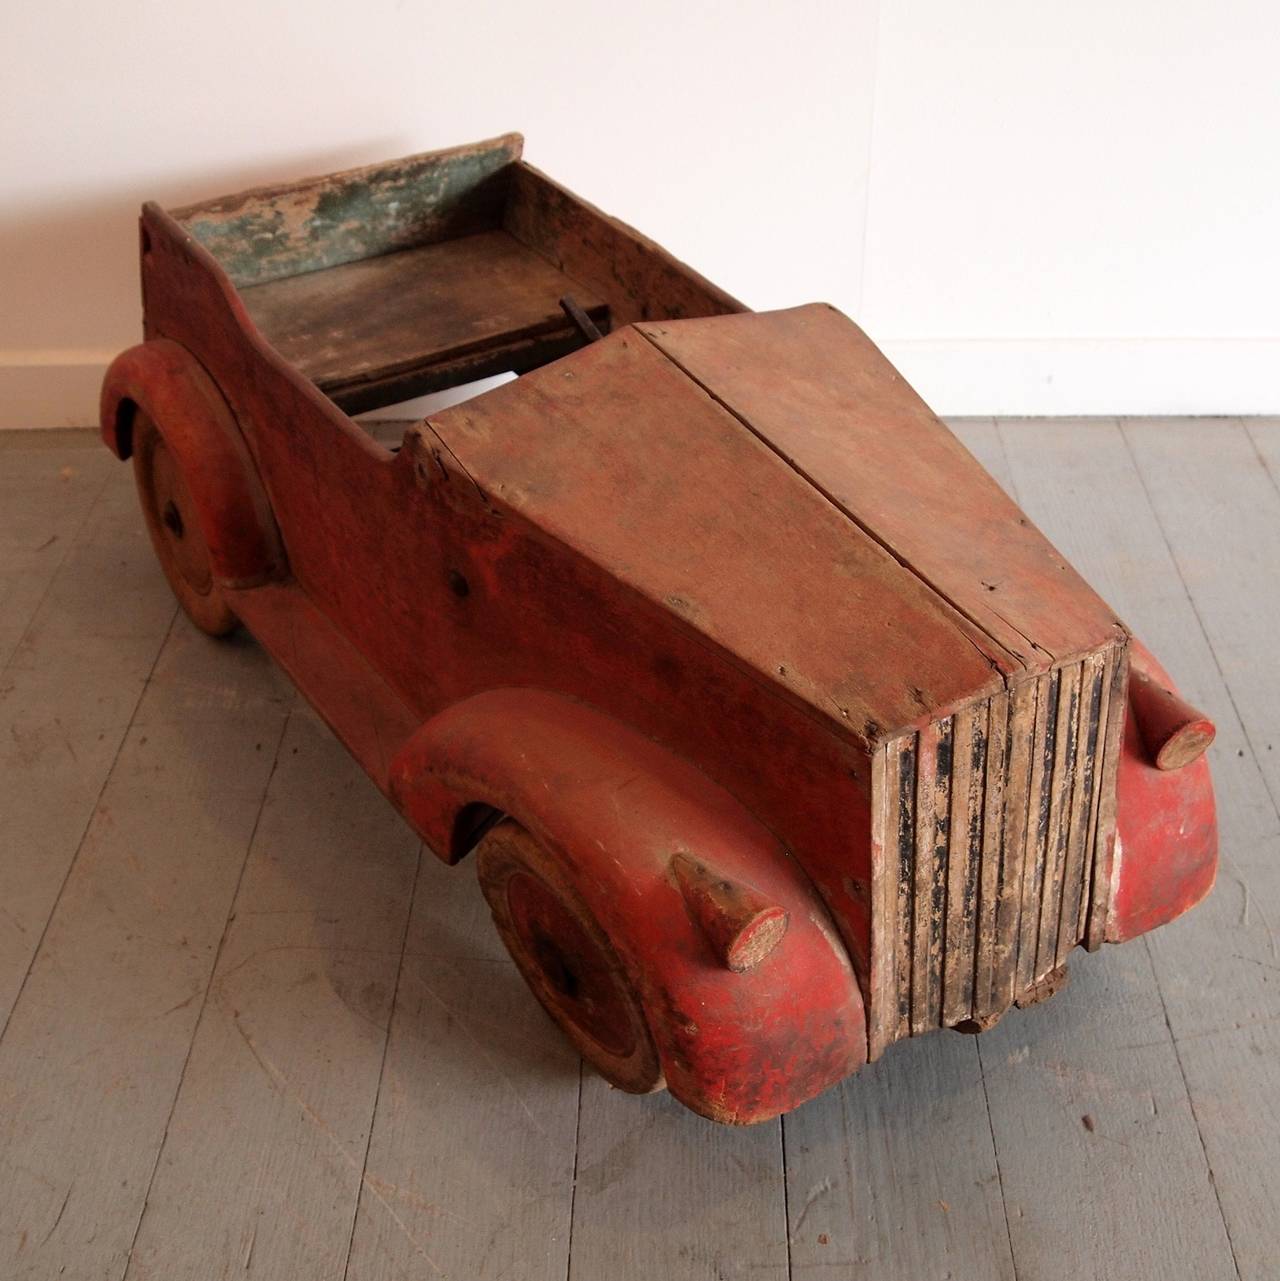 Beautiful handmade pedal car in the style of a Rolls Royce, with original red paint on the exterior, green painted interior and traces of black paint on the radiator. Turned timber wheels (two are later replacements).